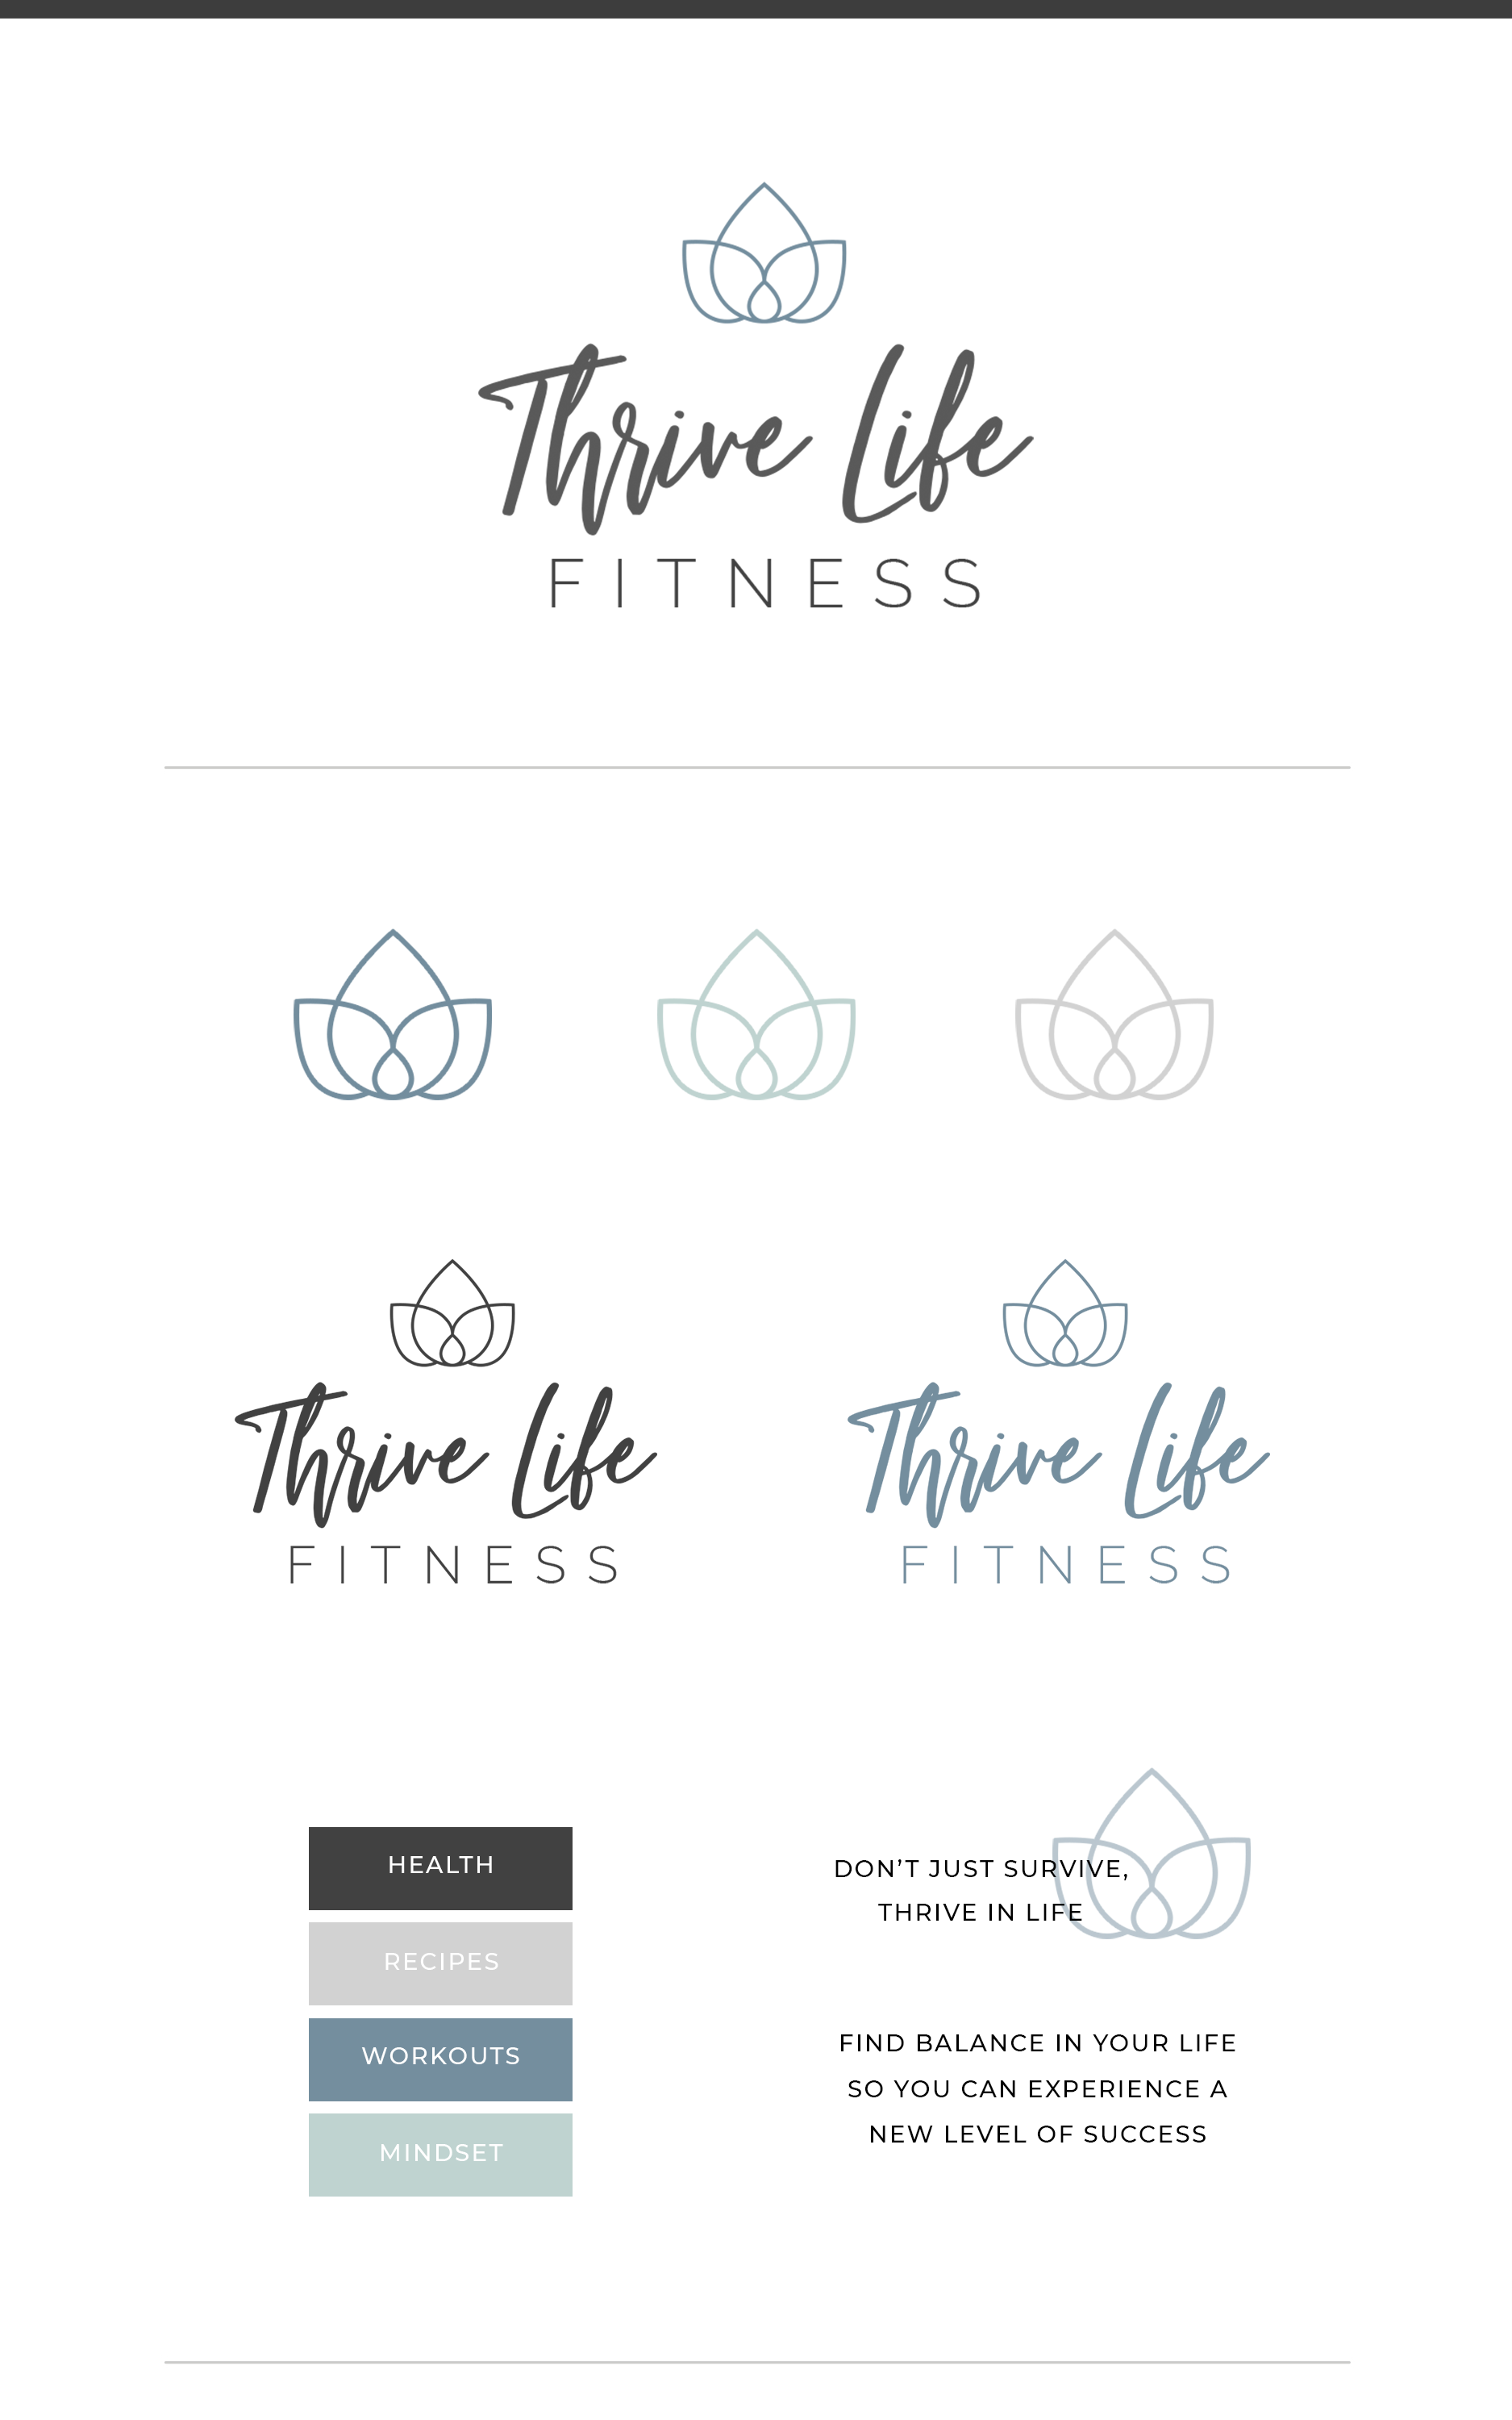 Brand Launch | Thrive Life Fitness | Be Bold Design Studio - Brand Launch | Thrive Life Fitness | Be Bold Design Studio -   10 healthy fitness Logo ideas